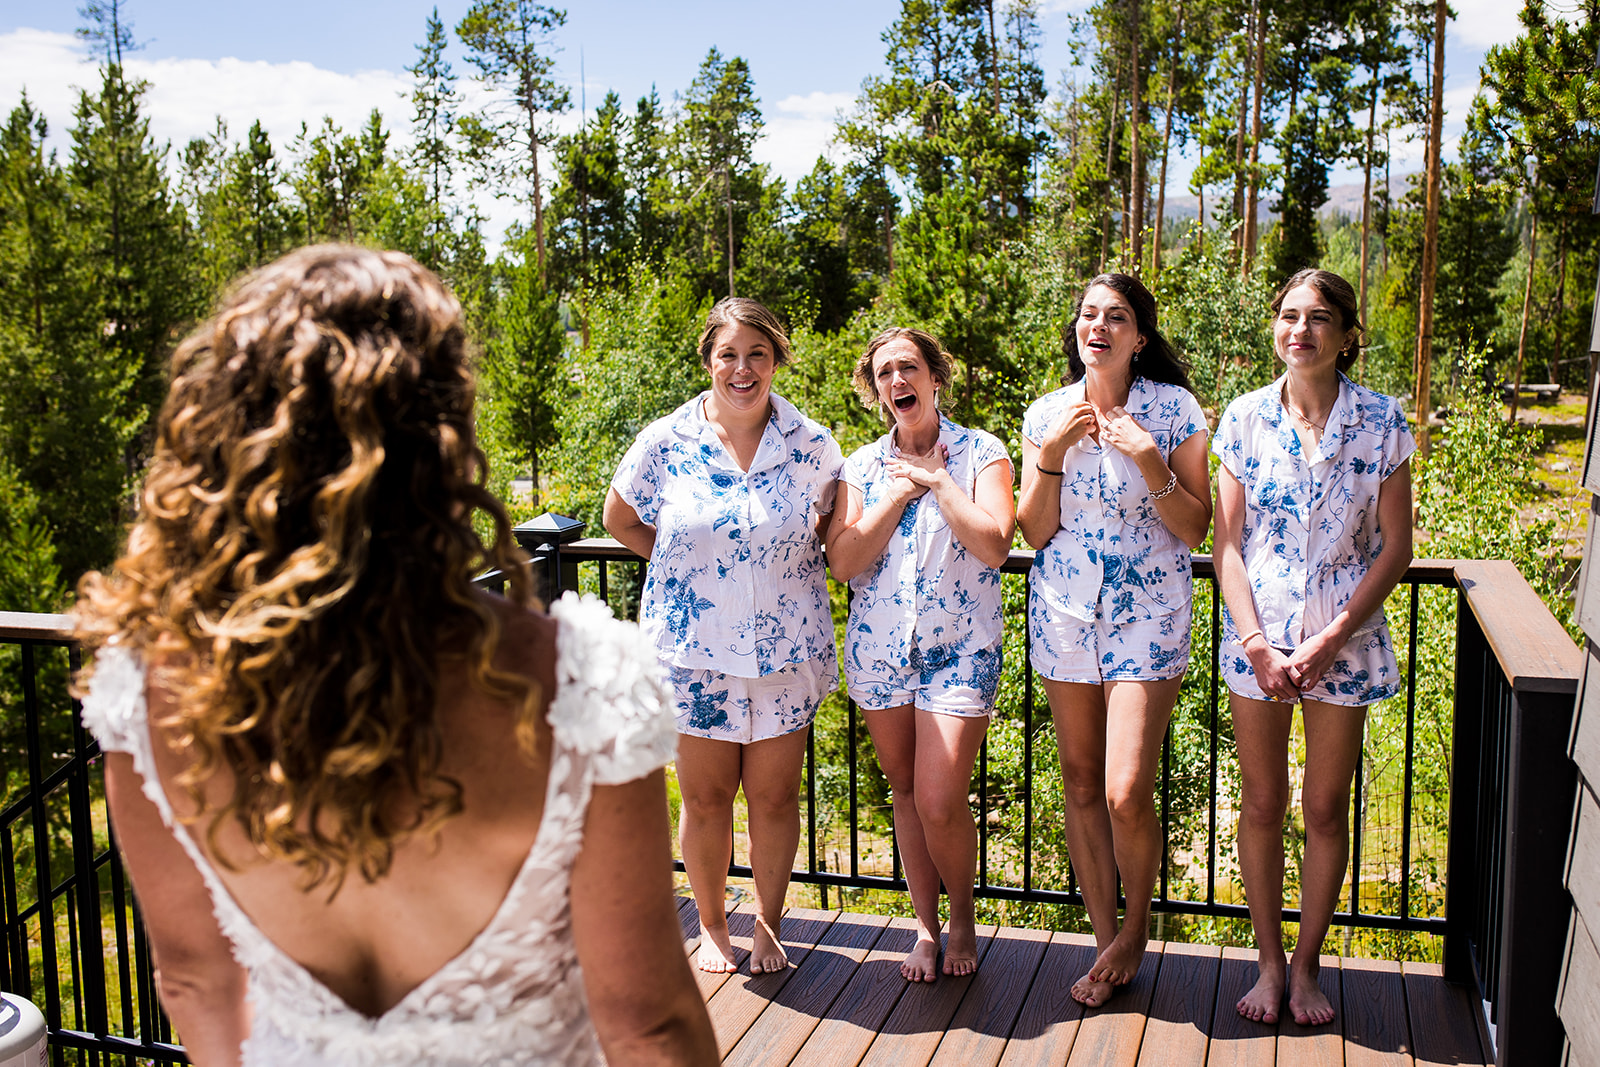 Bridesmaids react with joy to seeing bride in her dress for the first time.